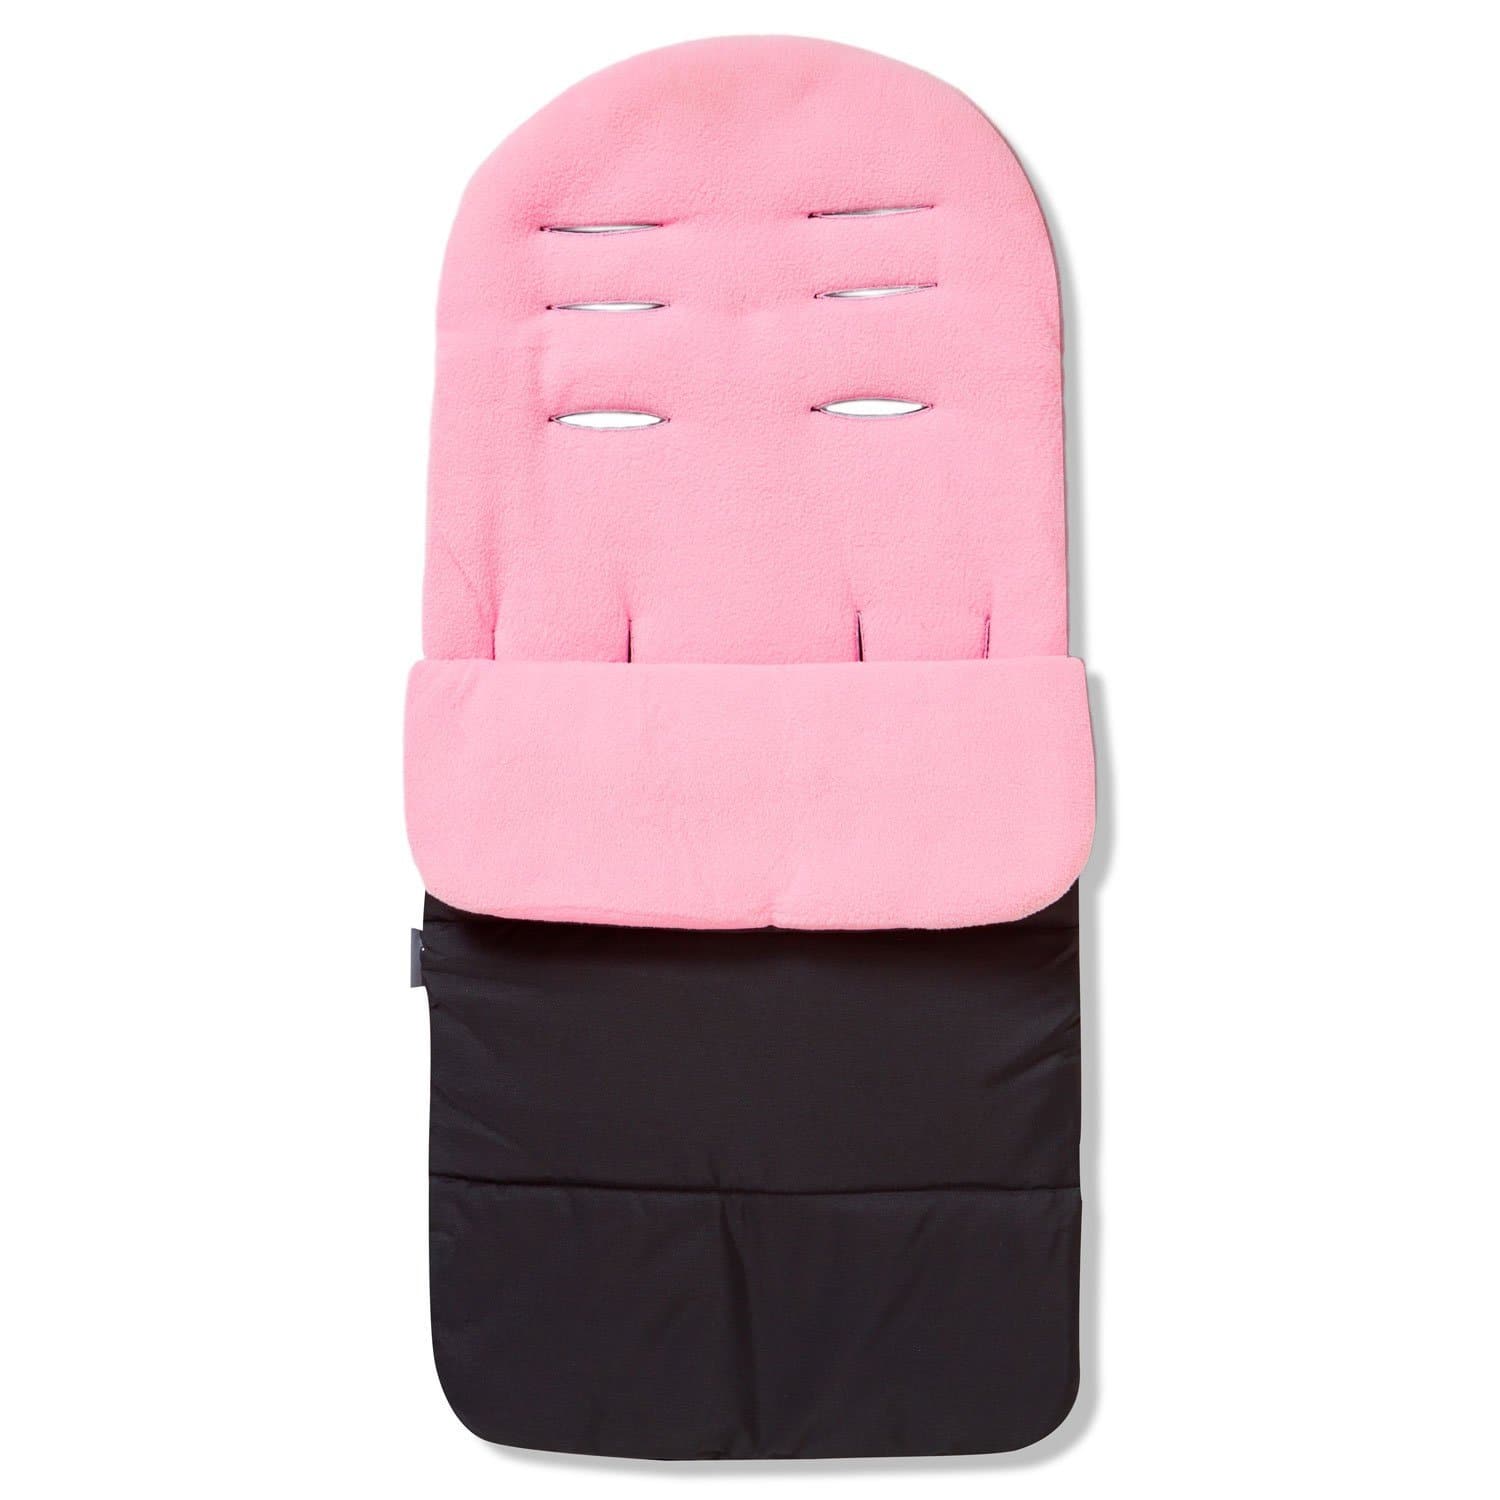 Premium Footmuff / Cosy Toes Compatible with Mee-Go - For Your Little One